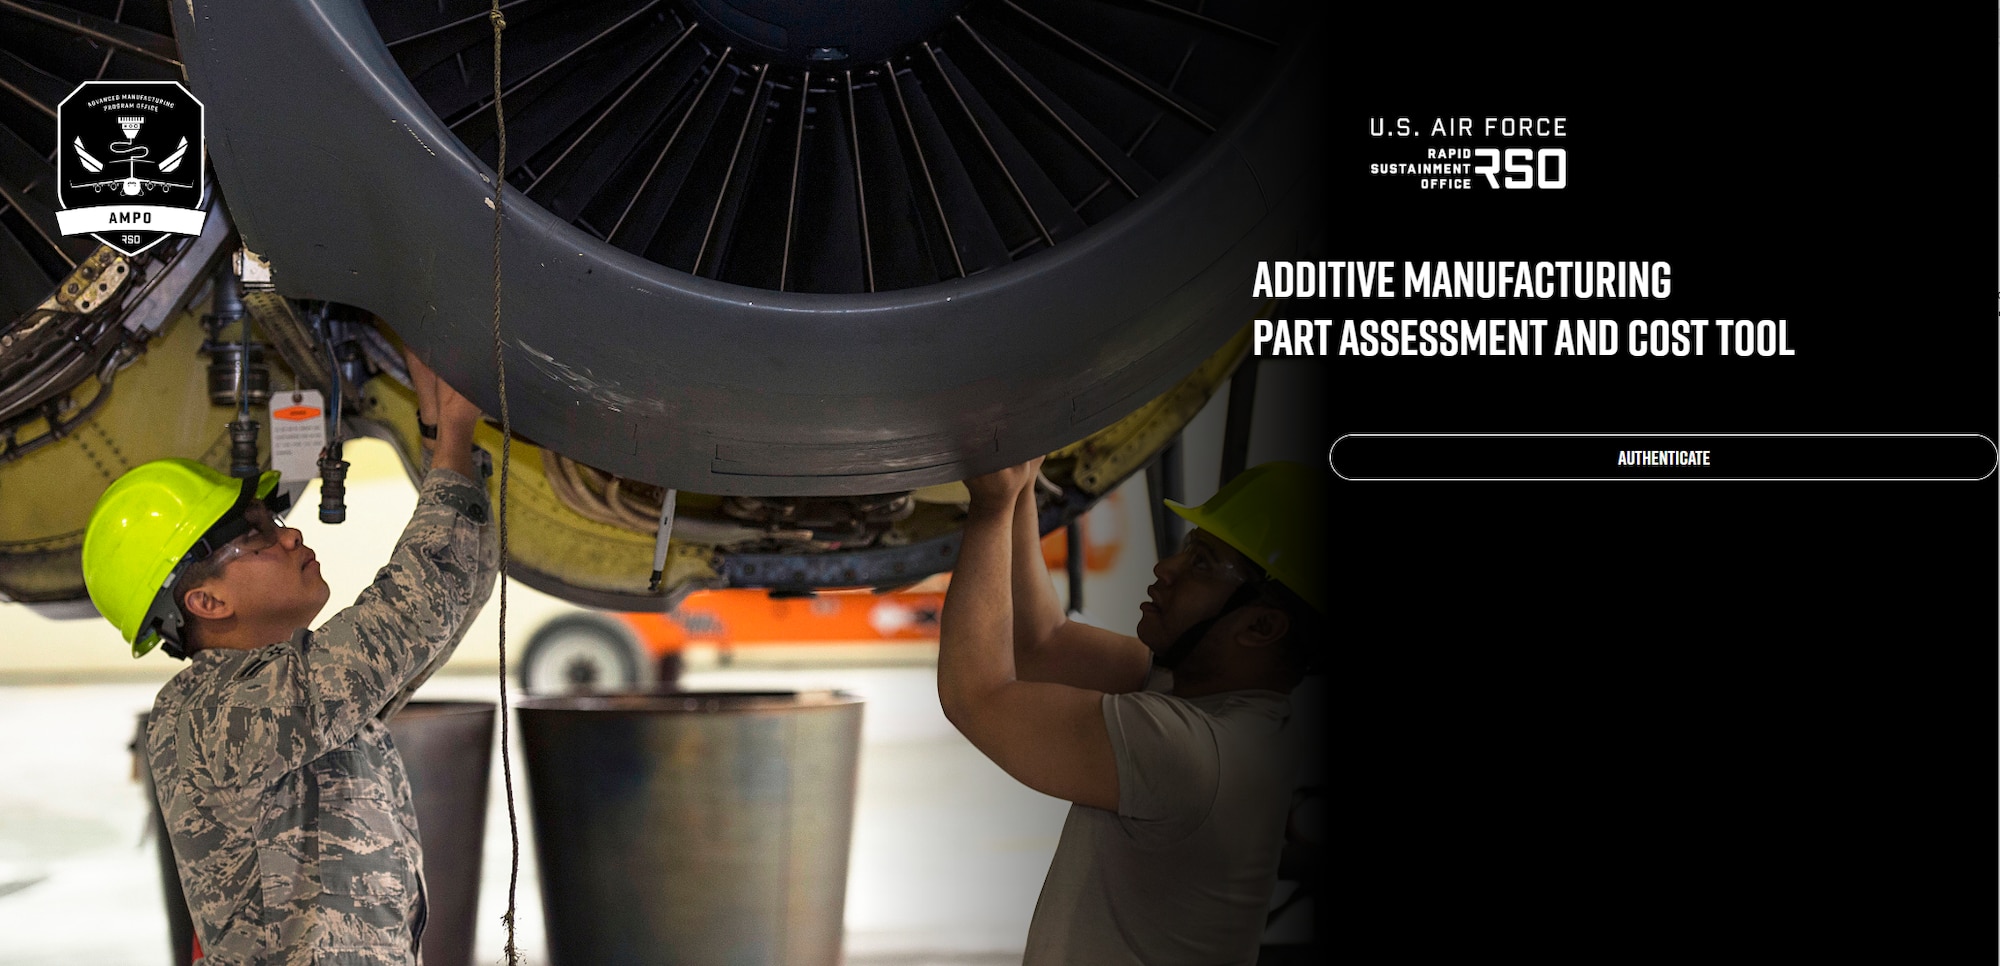 Graphic shows two people working on an airplane engine.